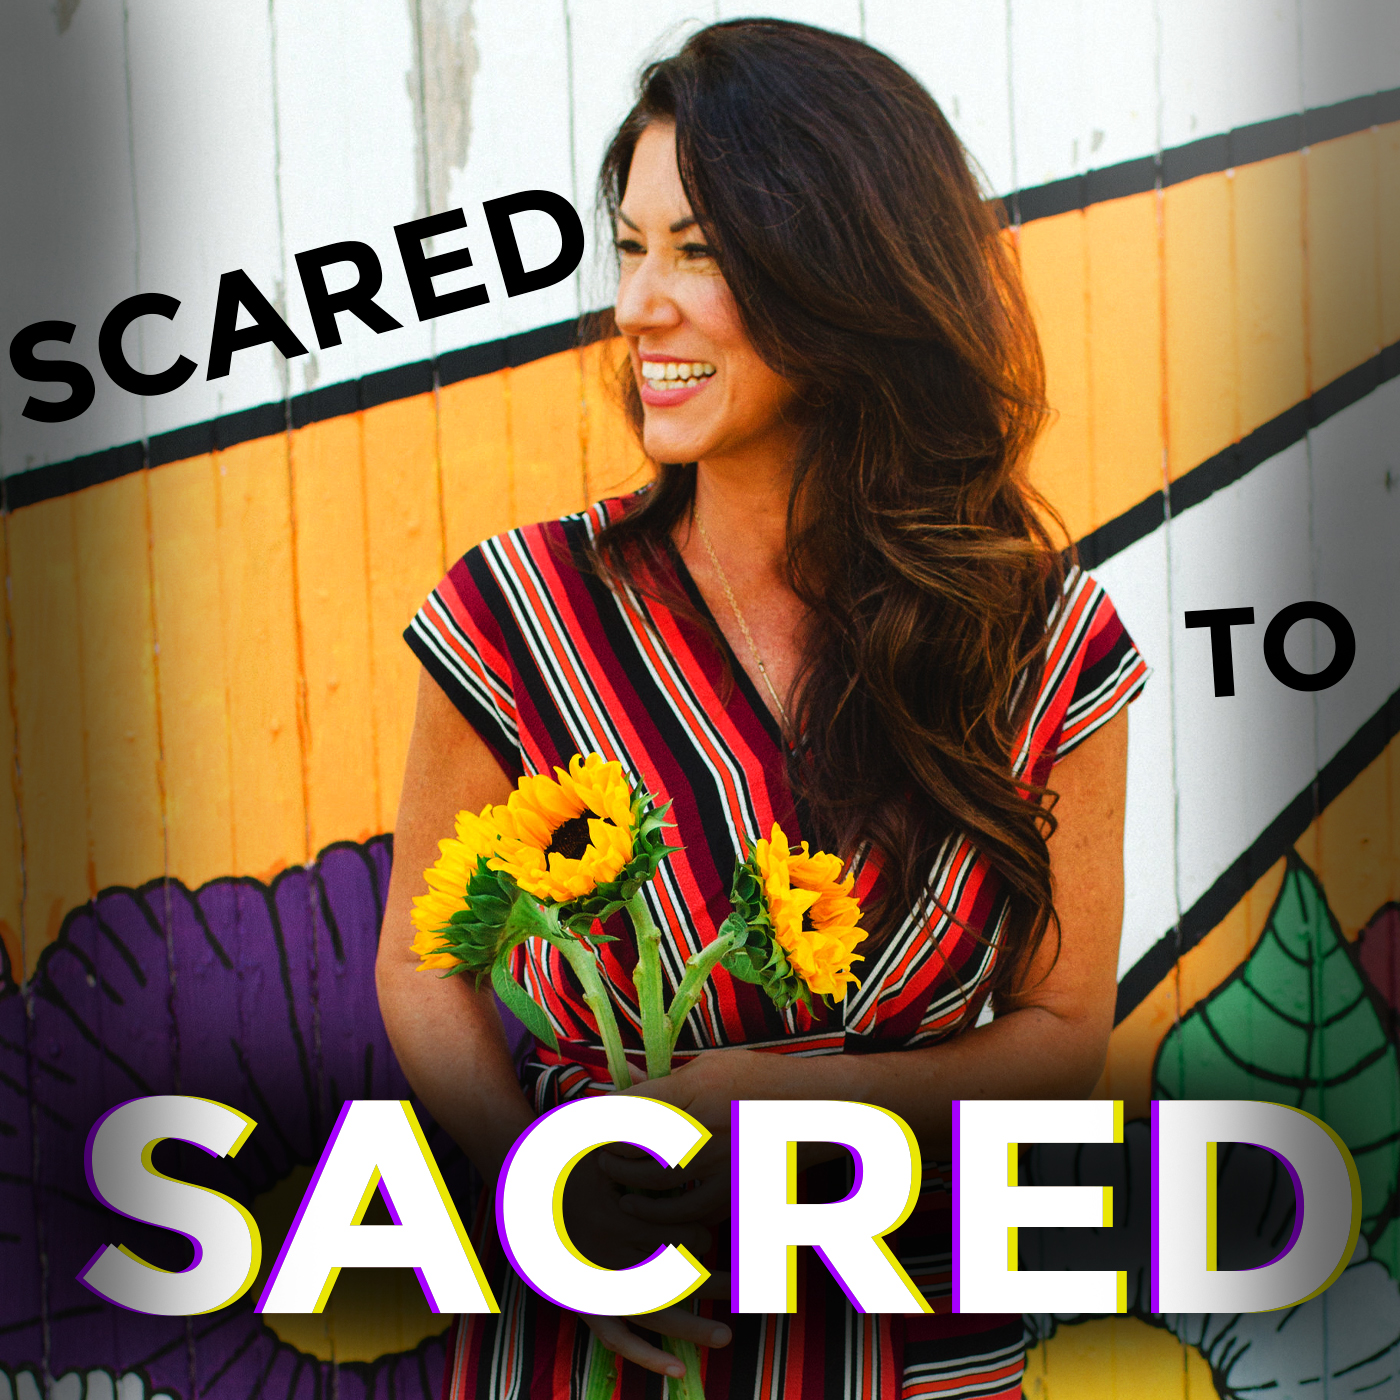 Scared to SACRED